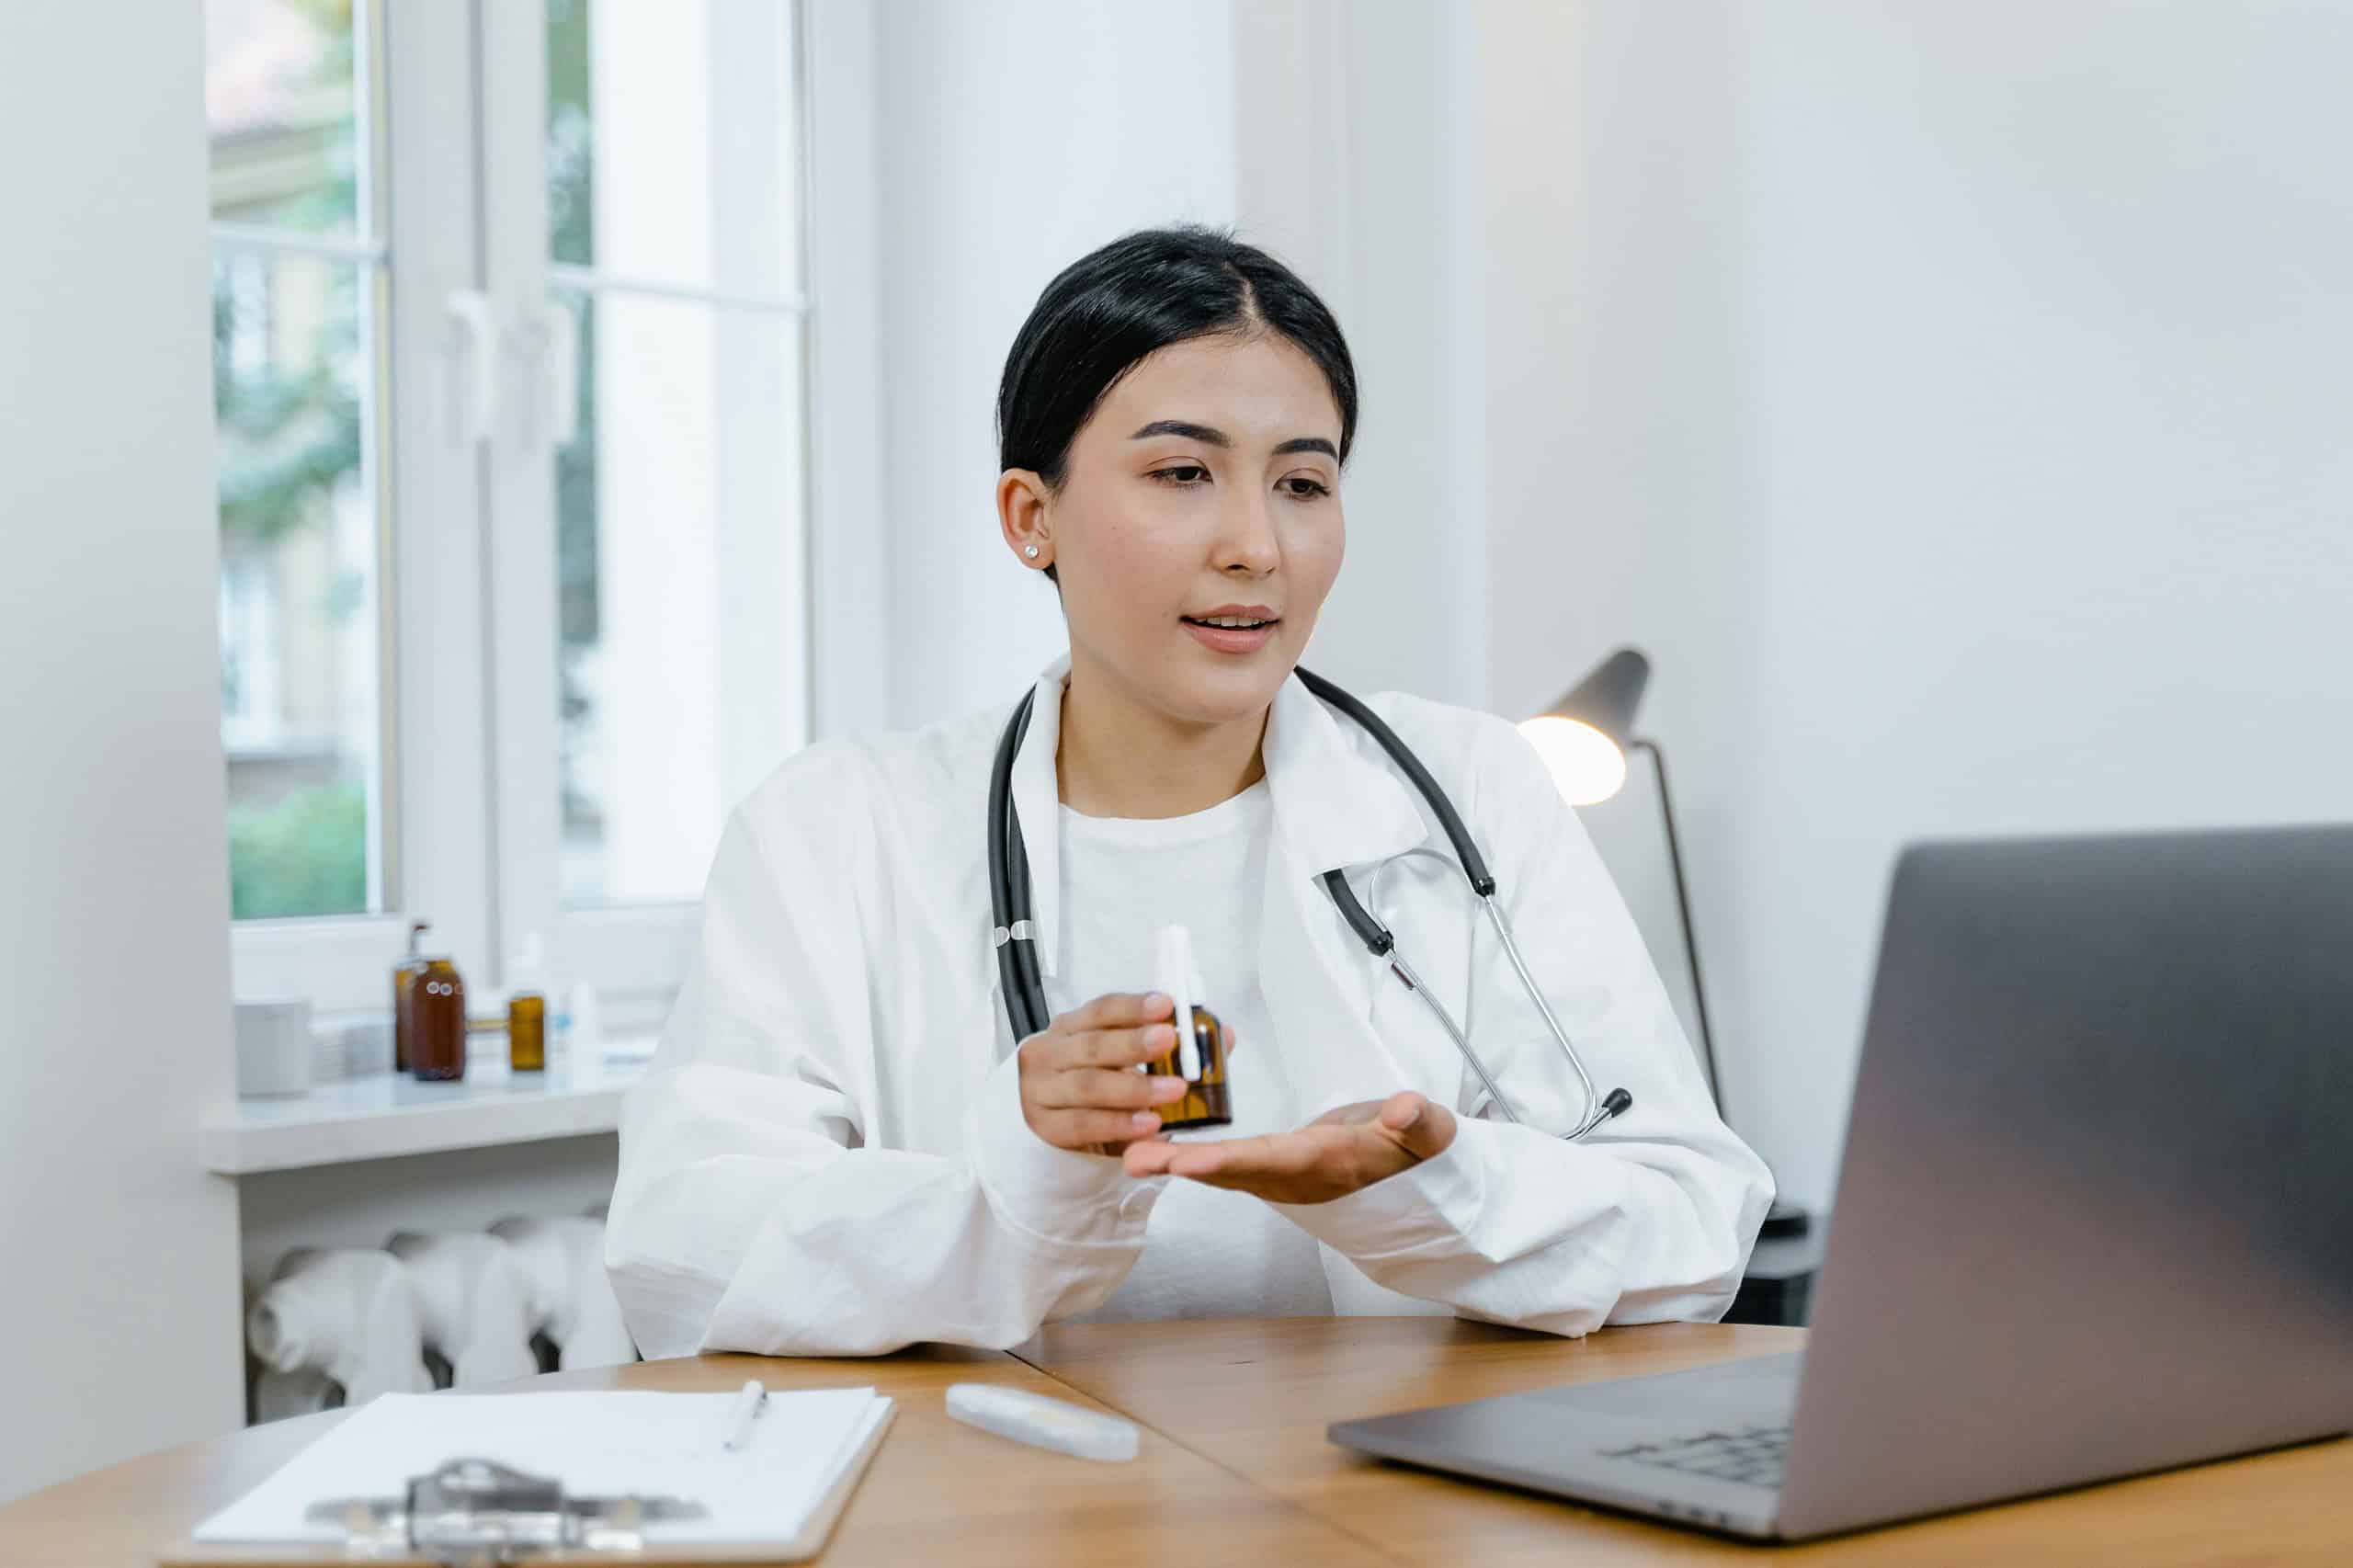 A primary care doctor in a white coat and stethoscope appears engaged in a video call, holding a small medication bottle in one hand, sitting at a desk with a clipboard, pen, and laptop.